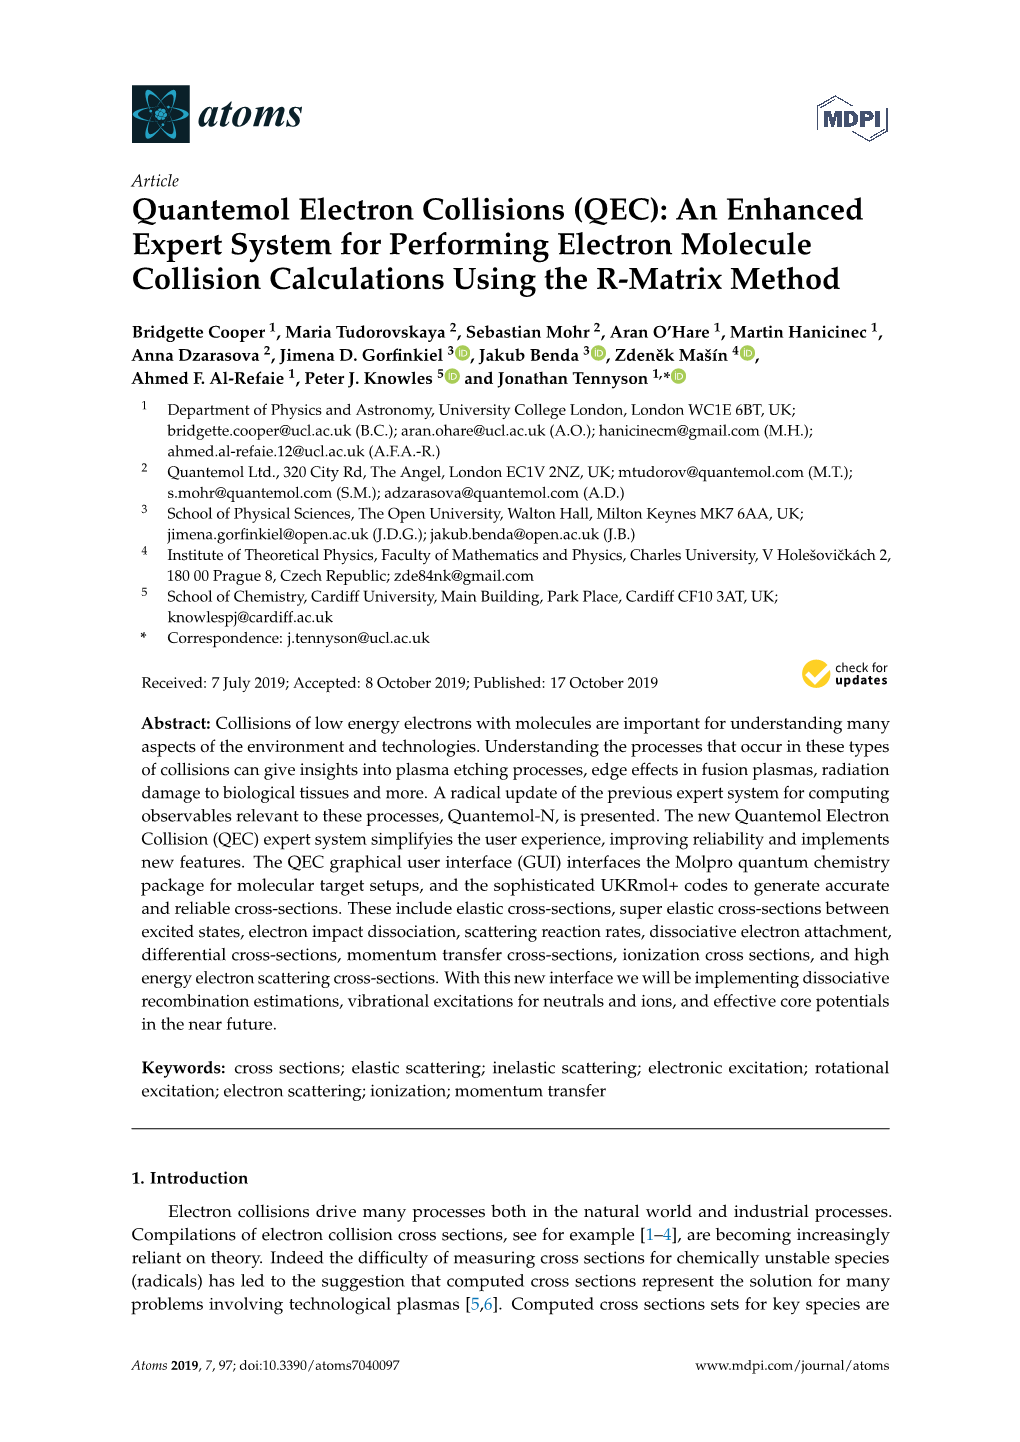 Quantemol Electron Collisions (QEC): an Enhanced Expert System for Performing Electron Molecule Collision Calculations Using the R-Matrix Method